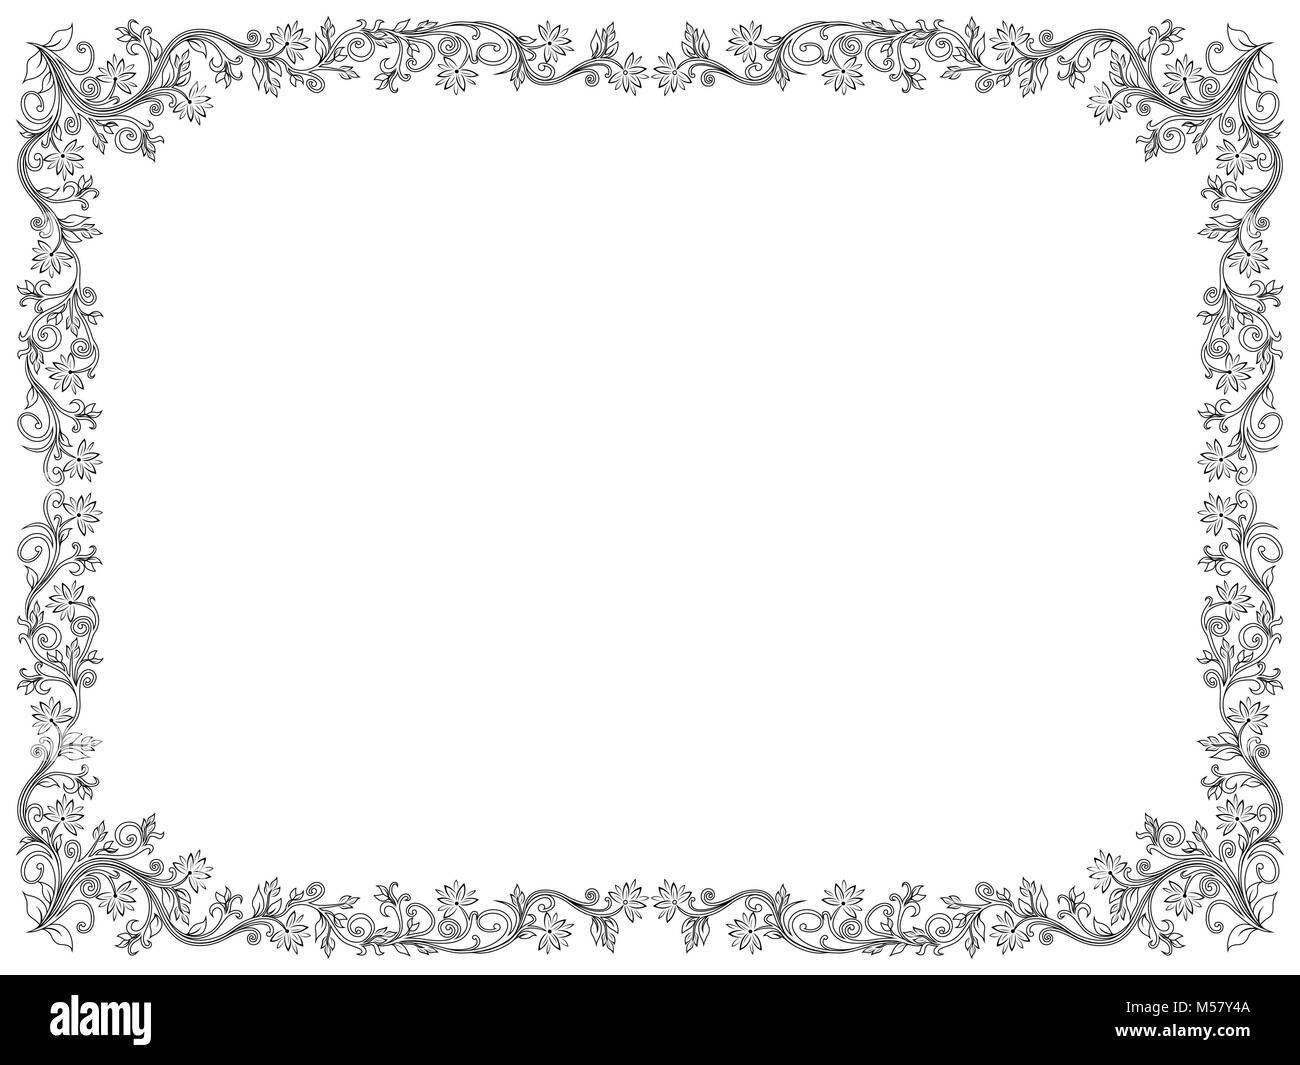 Ornamental floral frame with leaves and flowers isolated on the white background, vector illustration Stock Vector